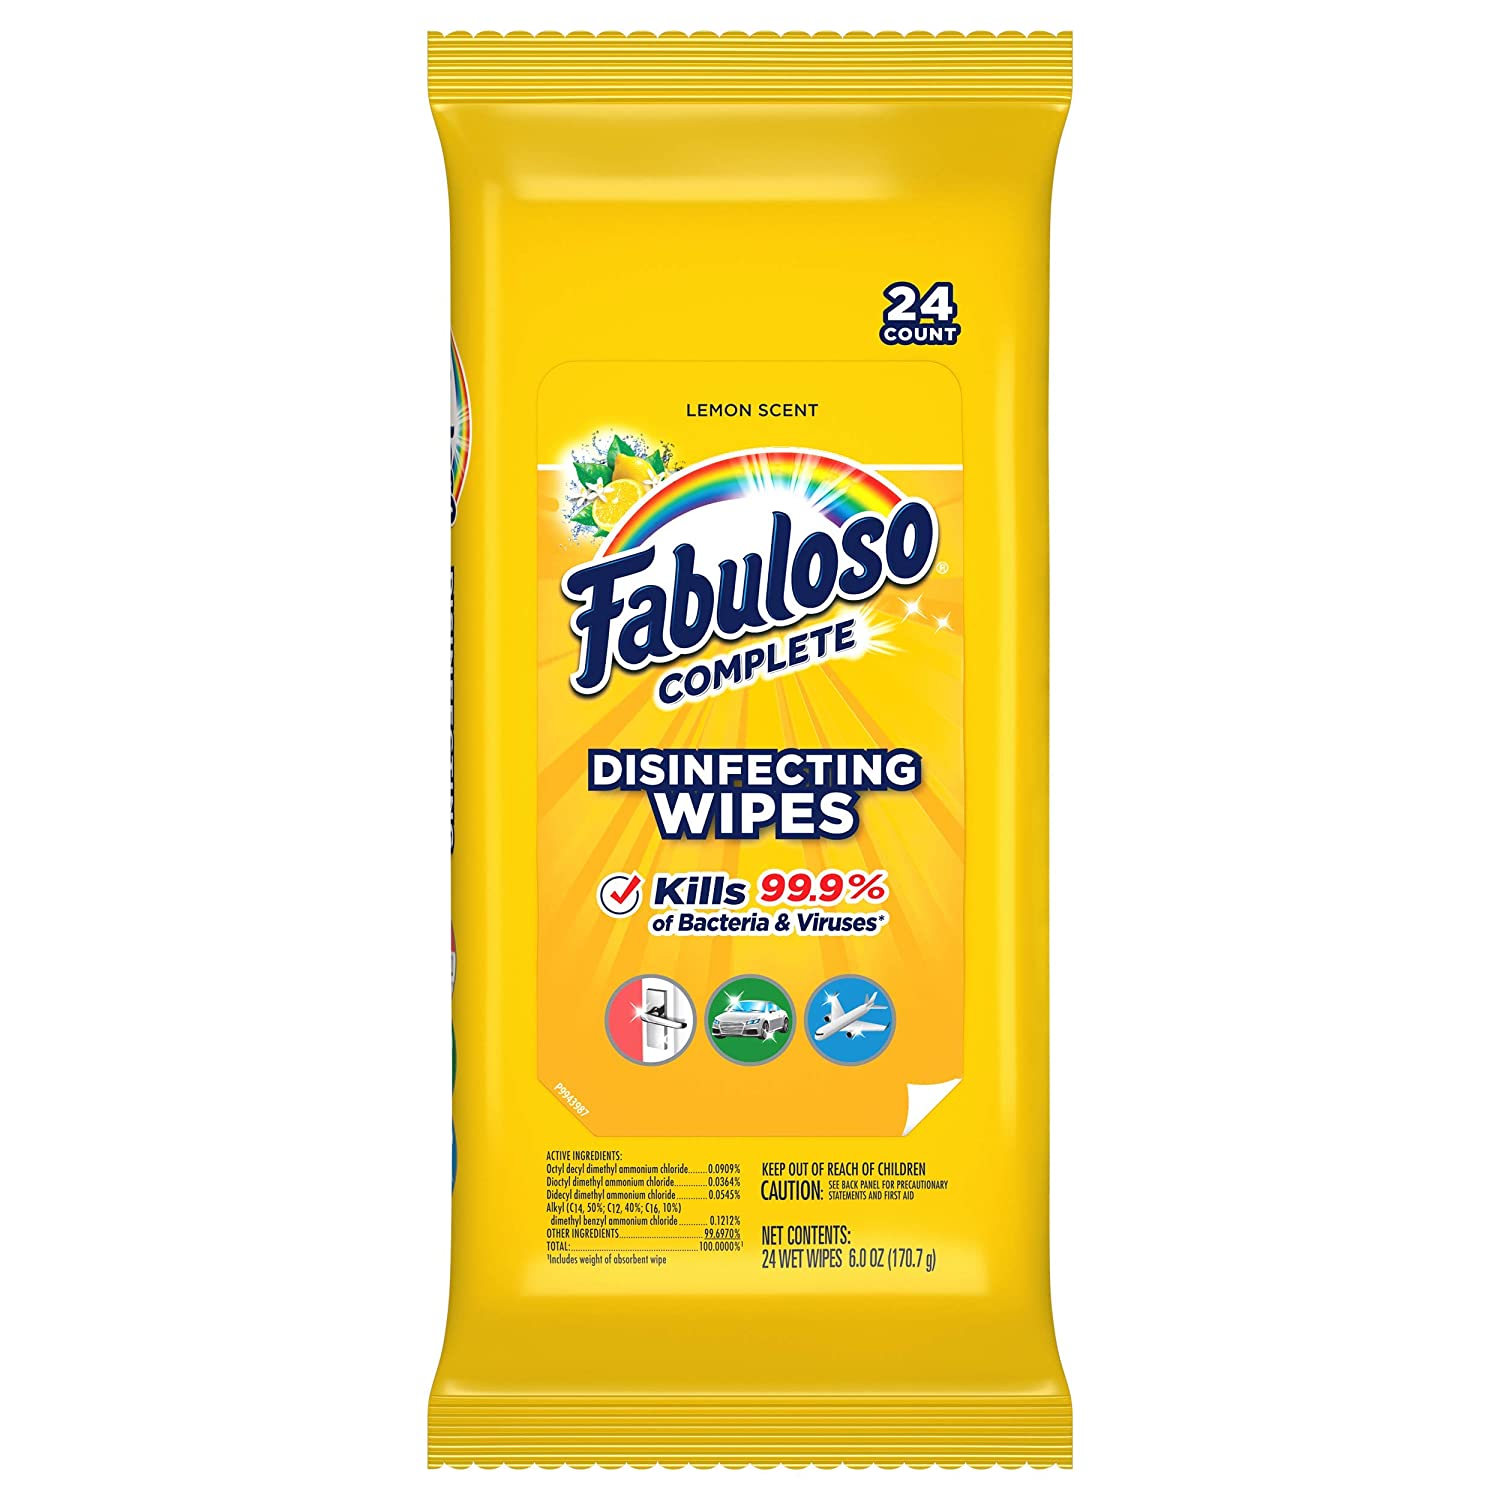 Fabuloso Complete Disinfecting Wipes, Lemon, 24 count